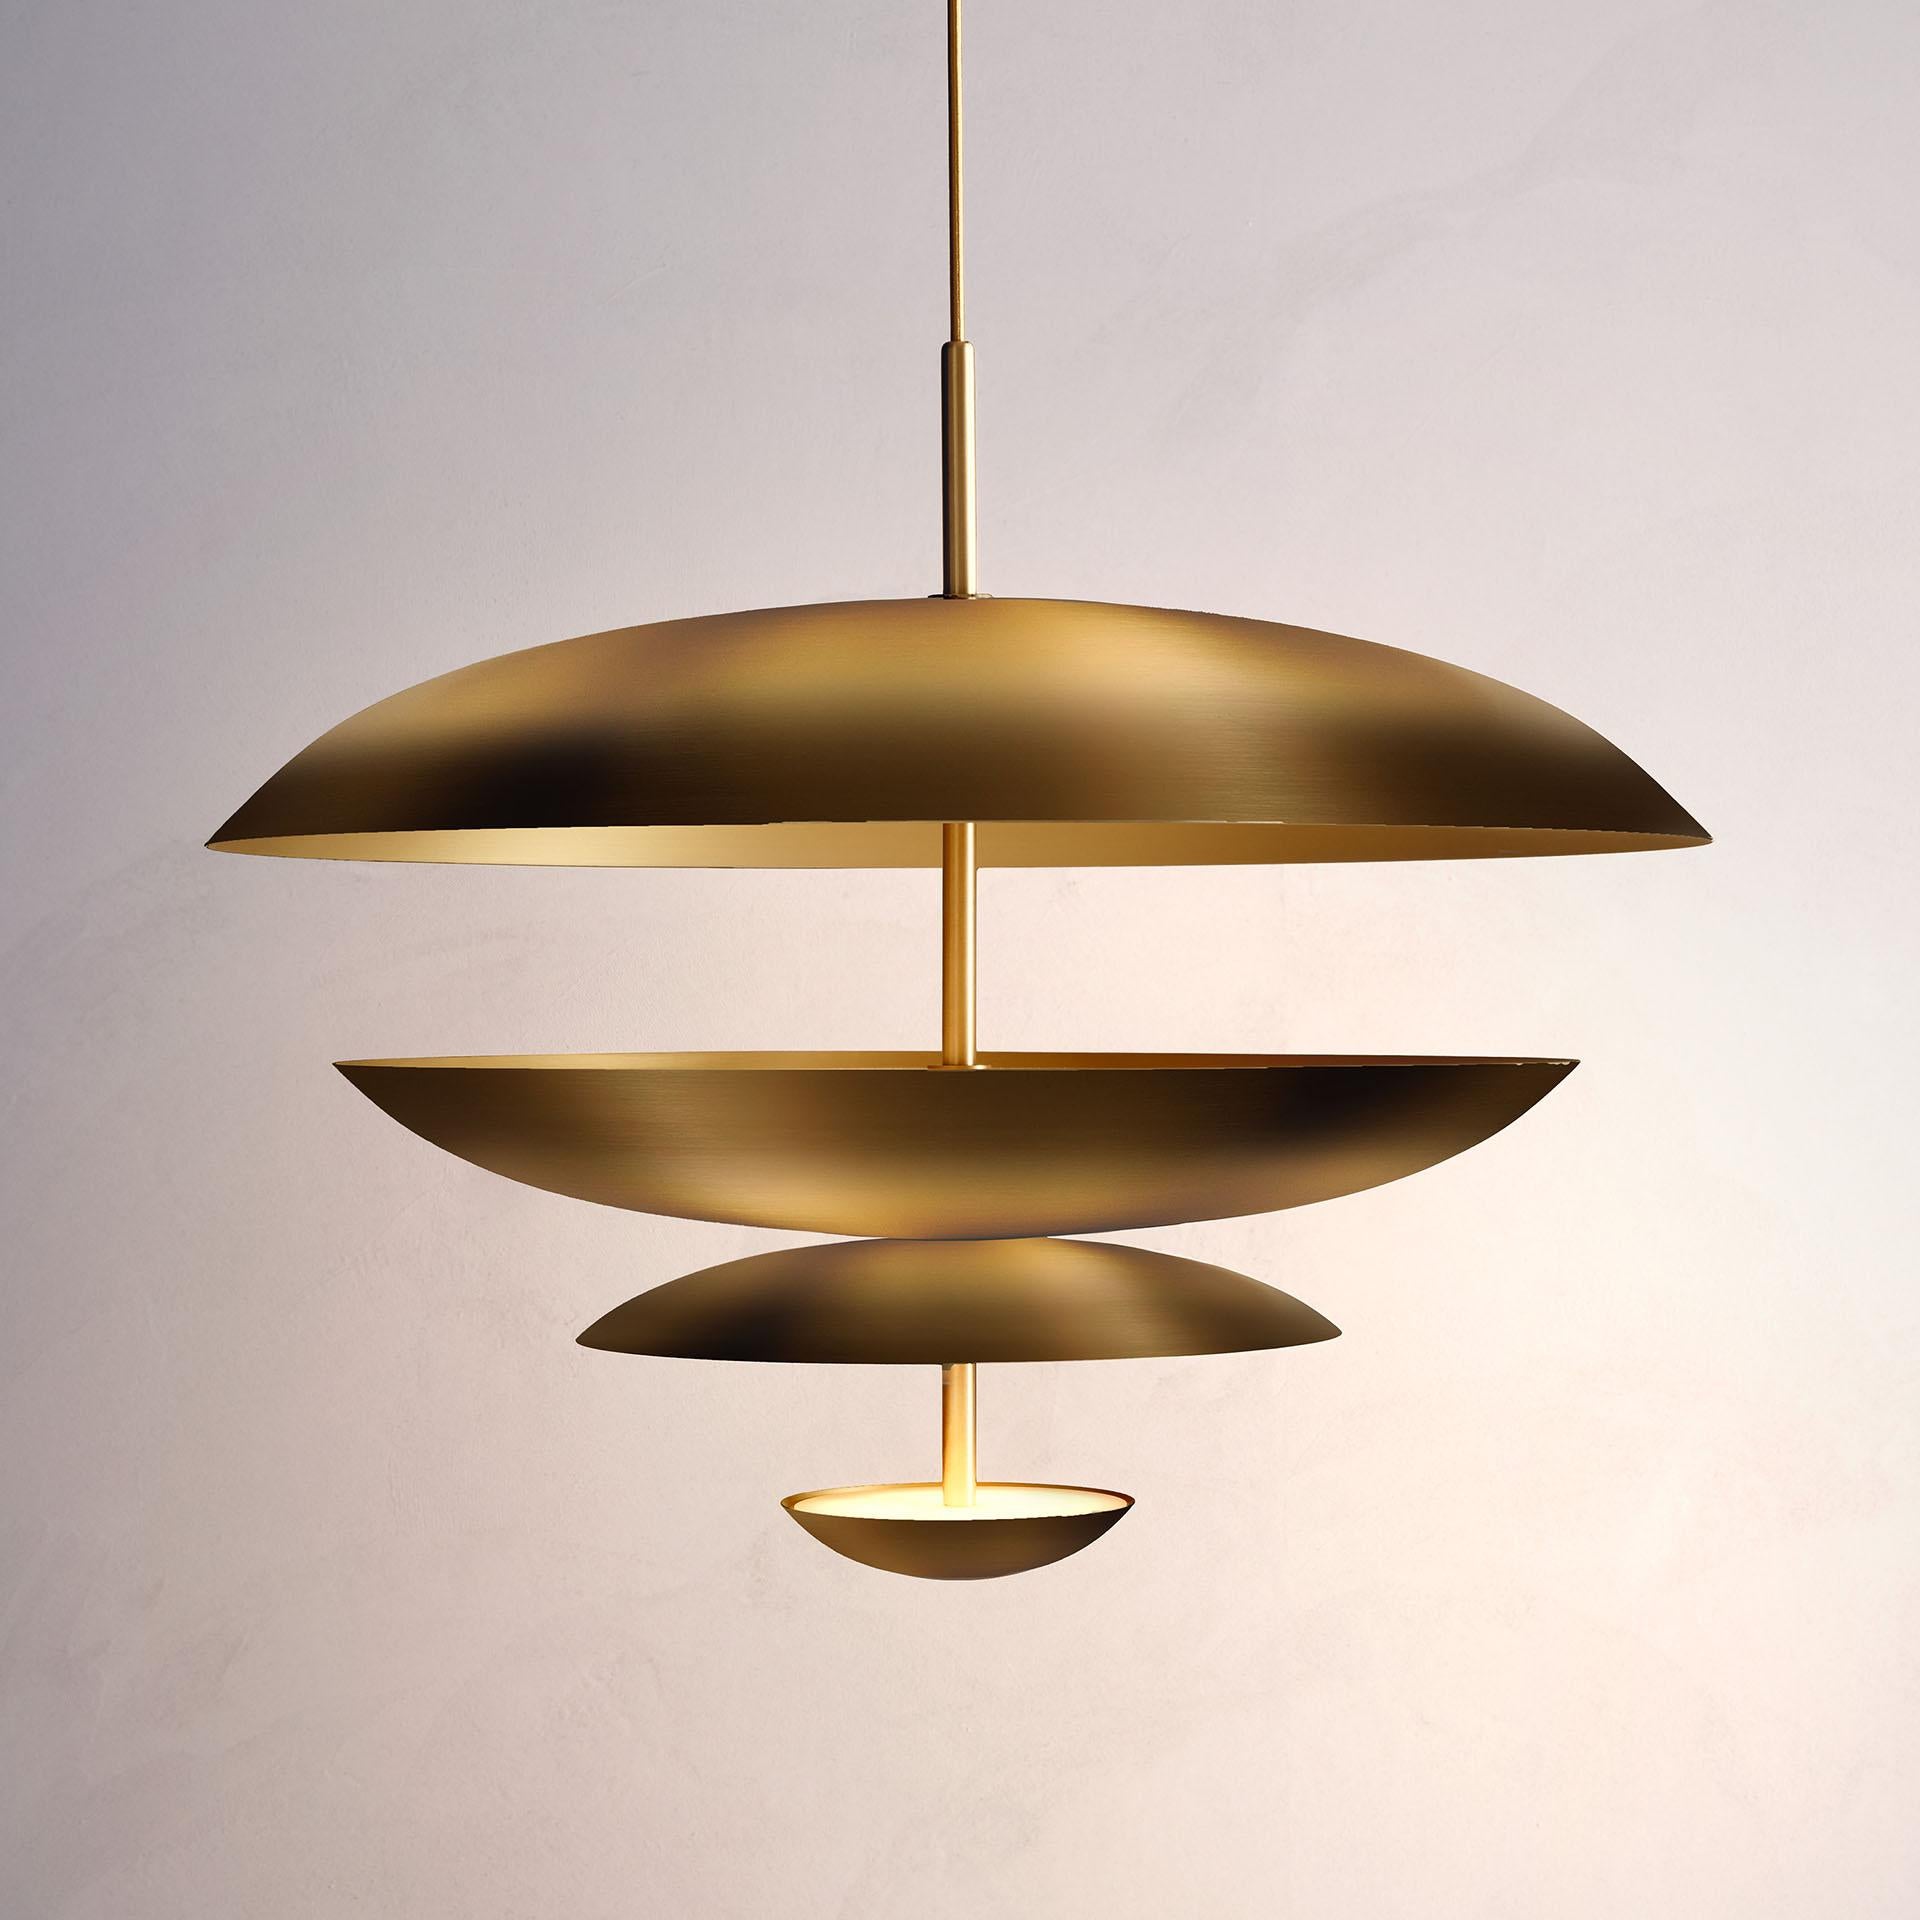 Inspired by planet-like shapes and textures, the Cosmic collection plays with both metal properties and a selection of patina finishes. Composed of four carefully hand-spun brass plates, our Ore Chandelier is finished with a mixed patina to create